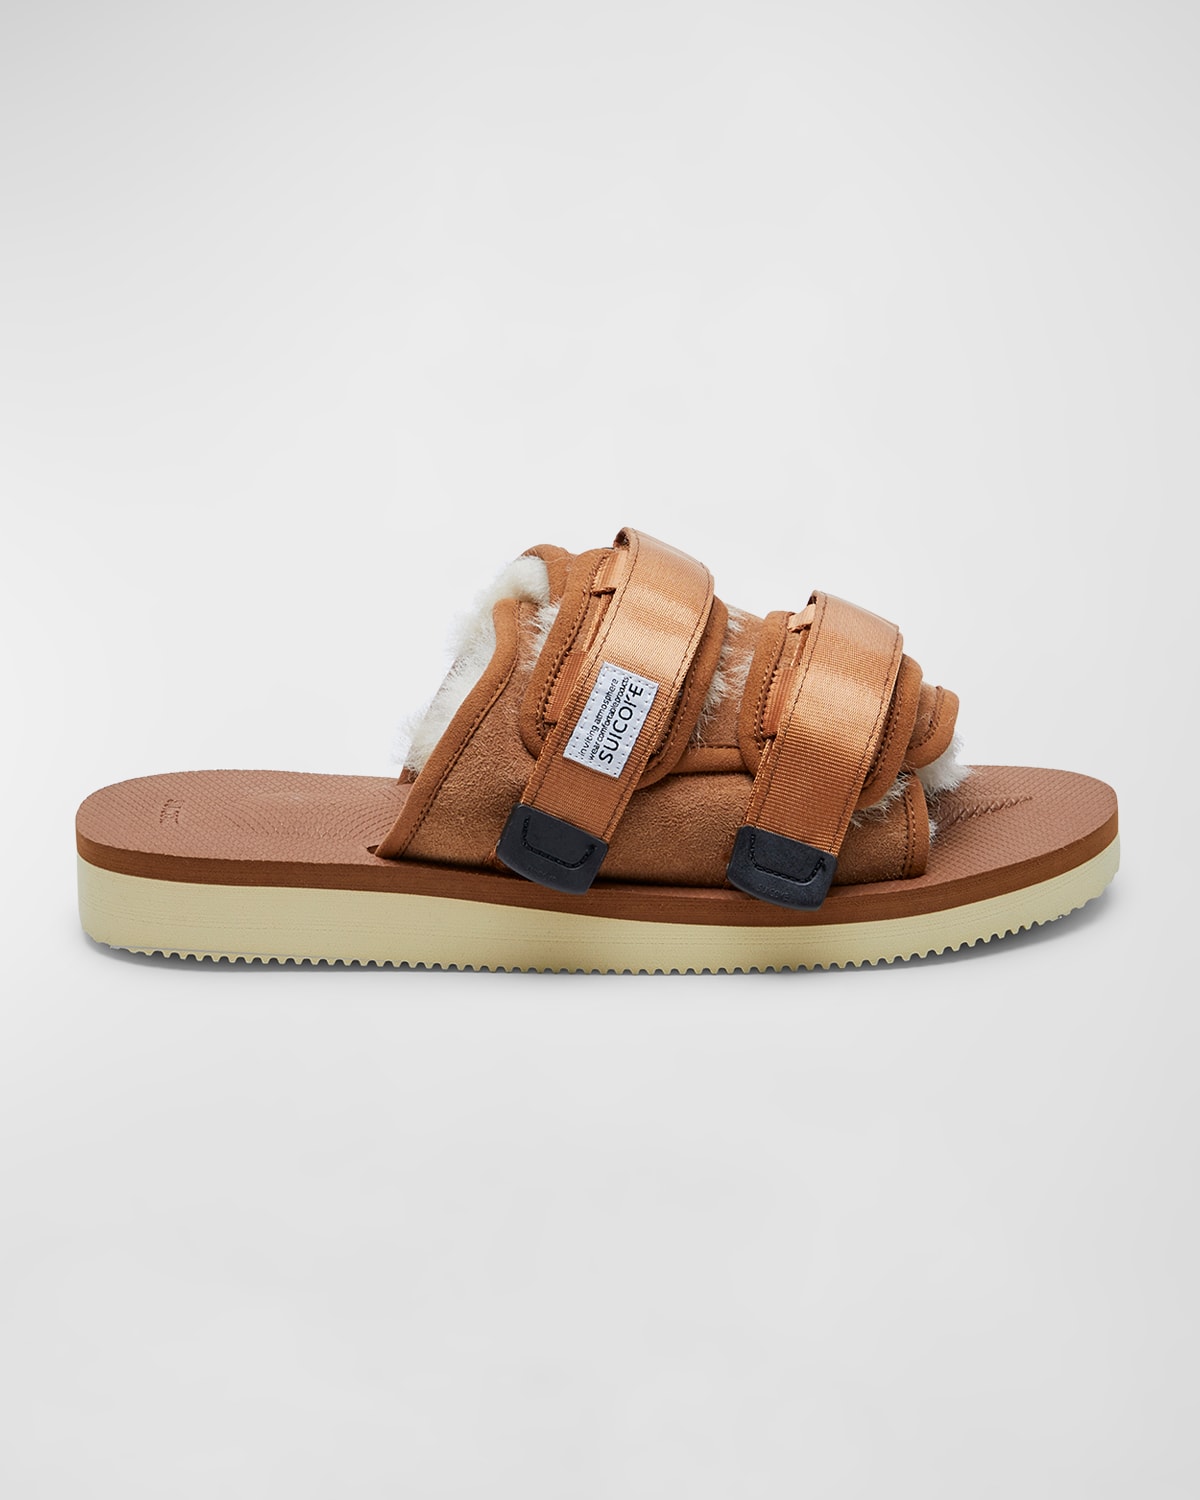 Men's MOTO-M2AB Shearling and Suede Slide Sandals